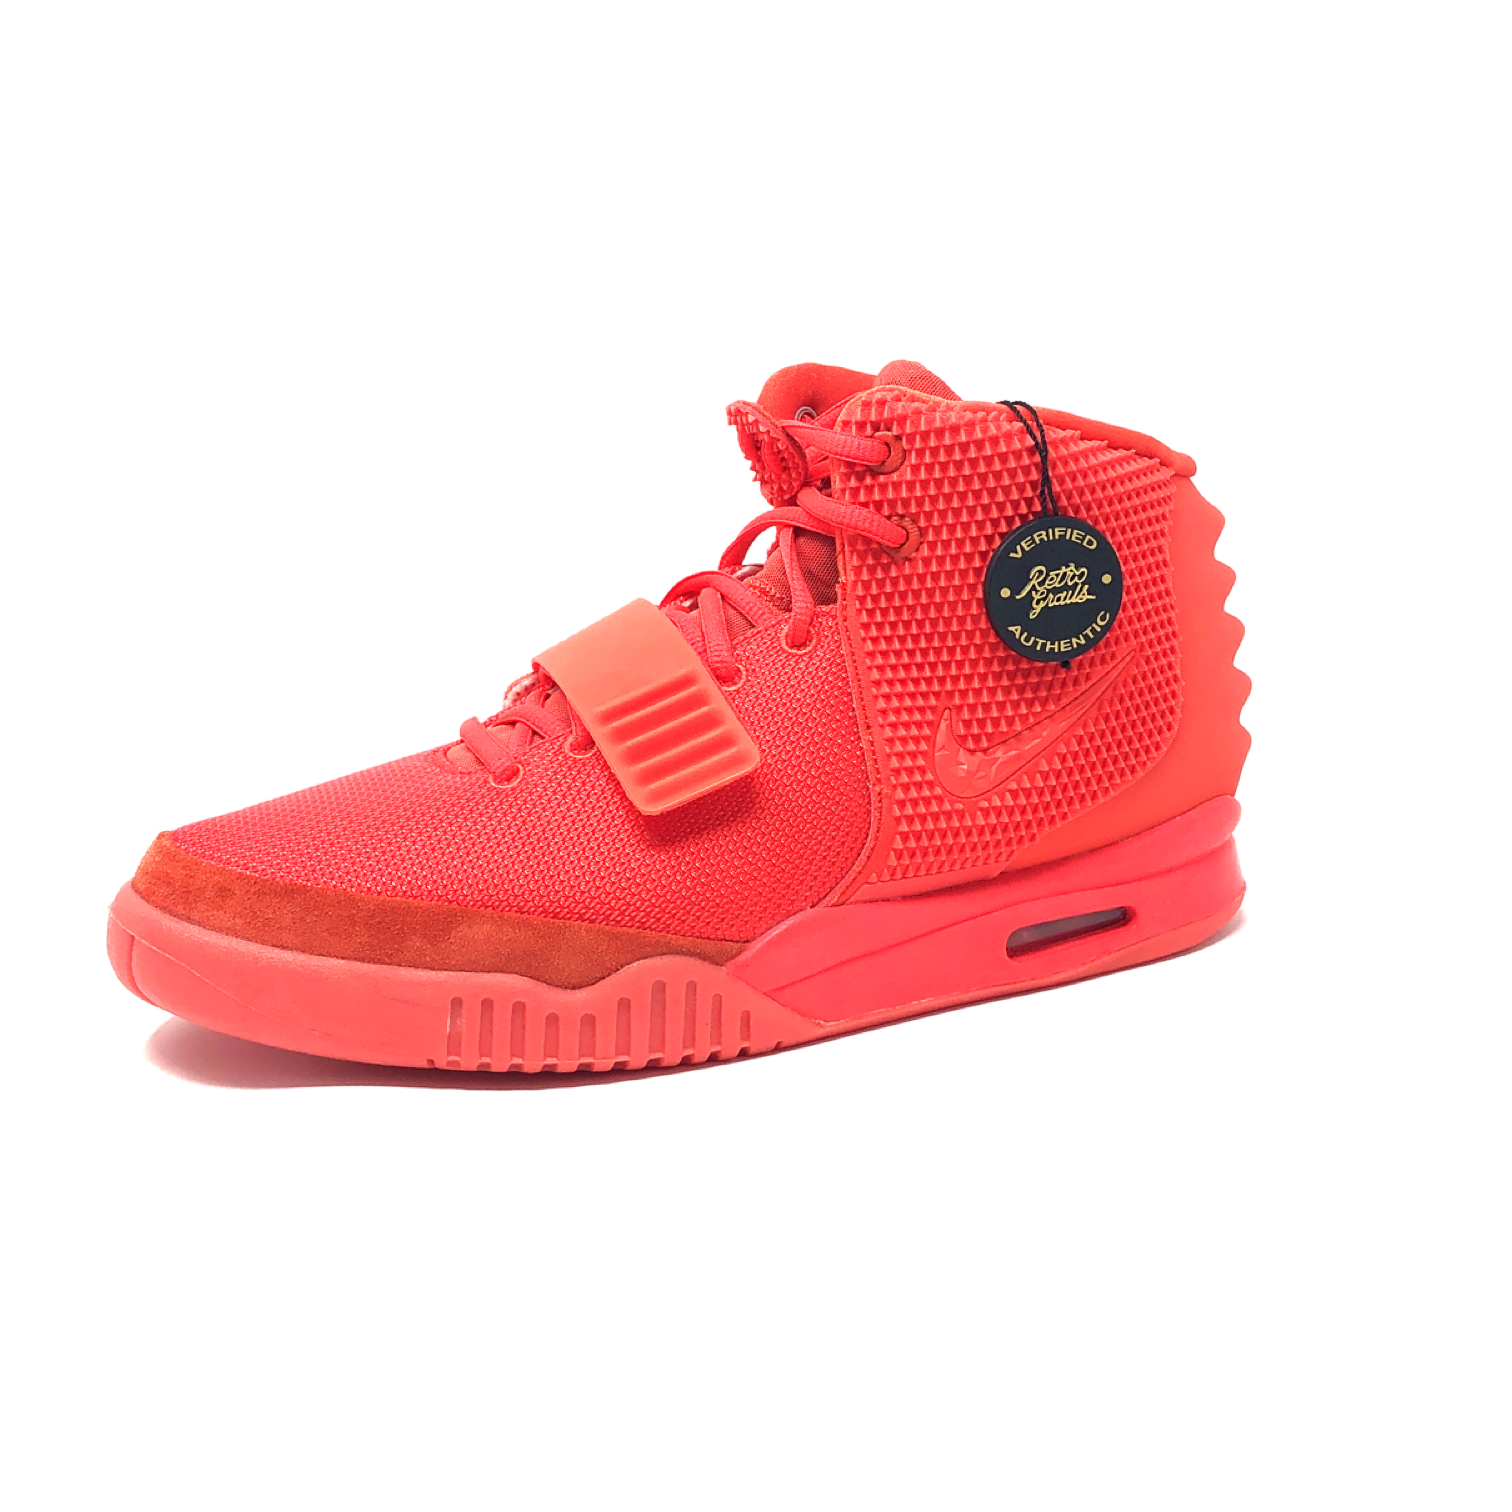 Nike Air Yeezy 2 Red October – Retro Grails